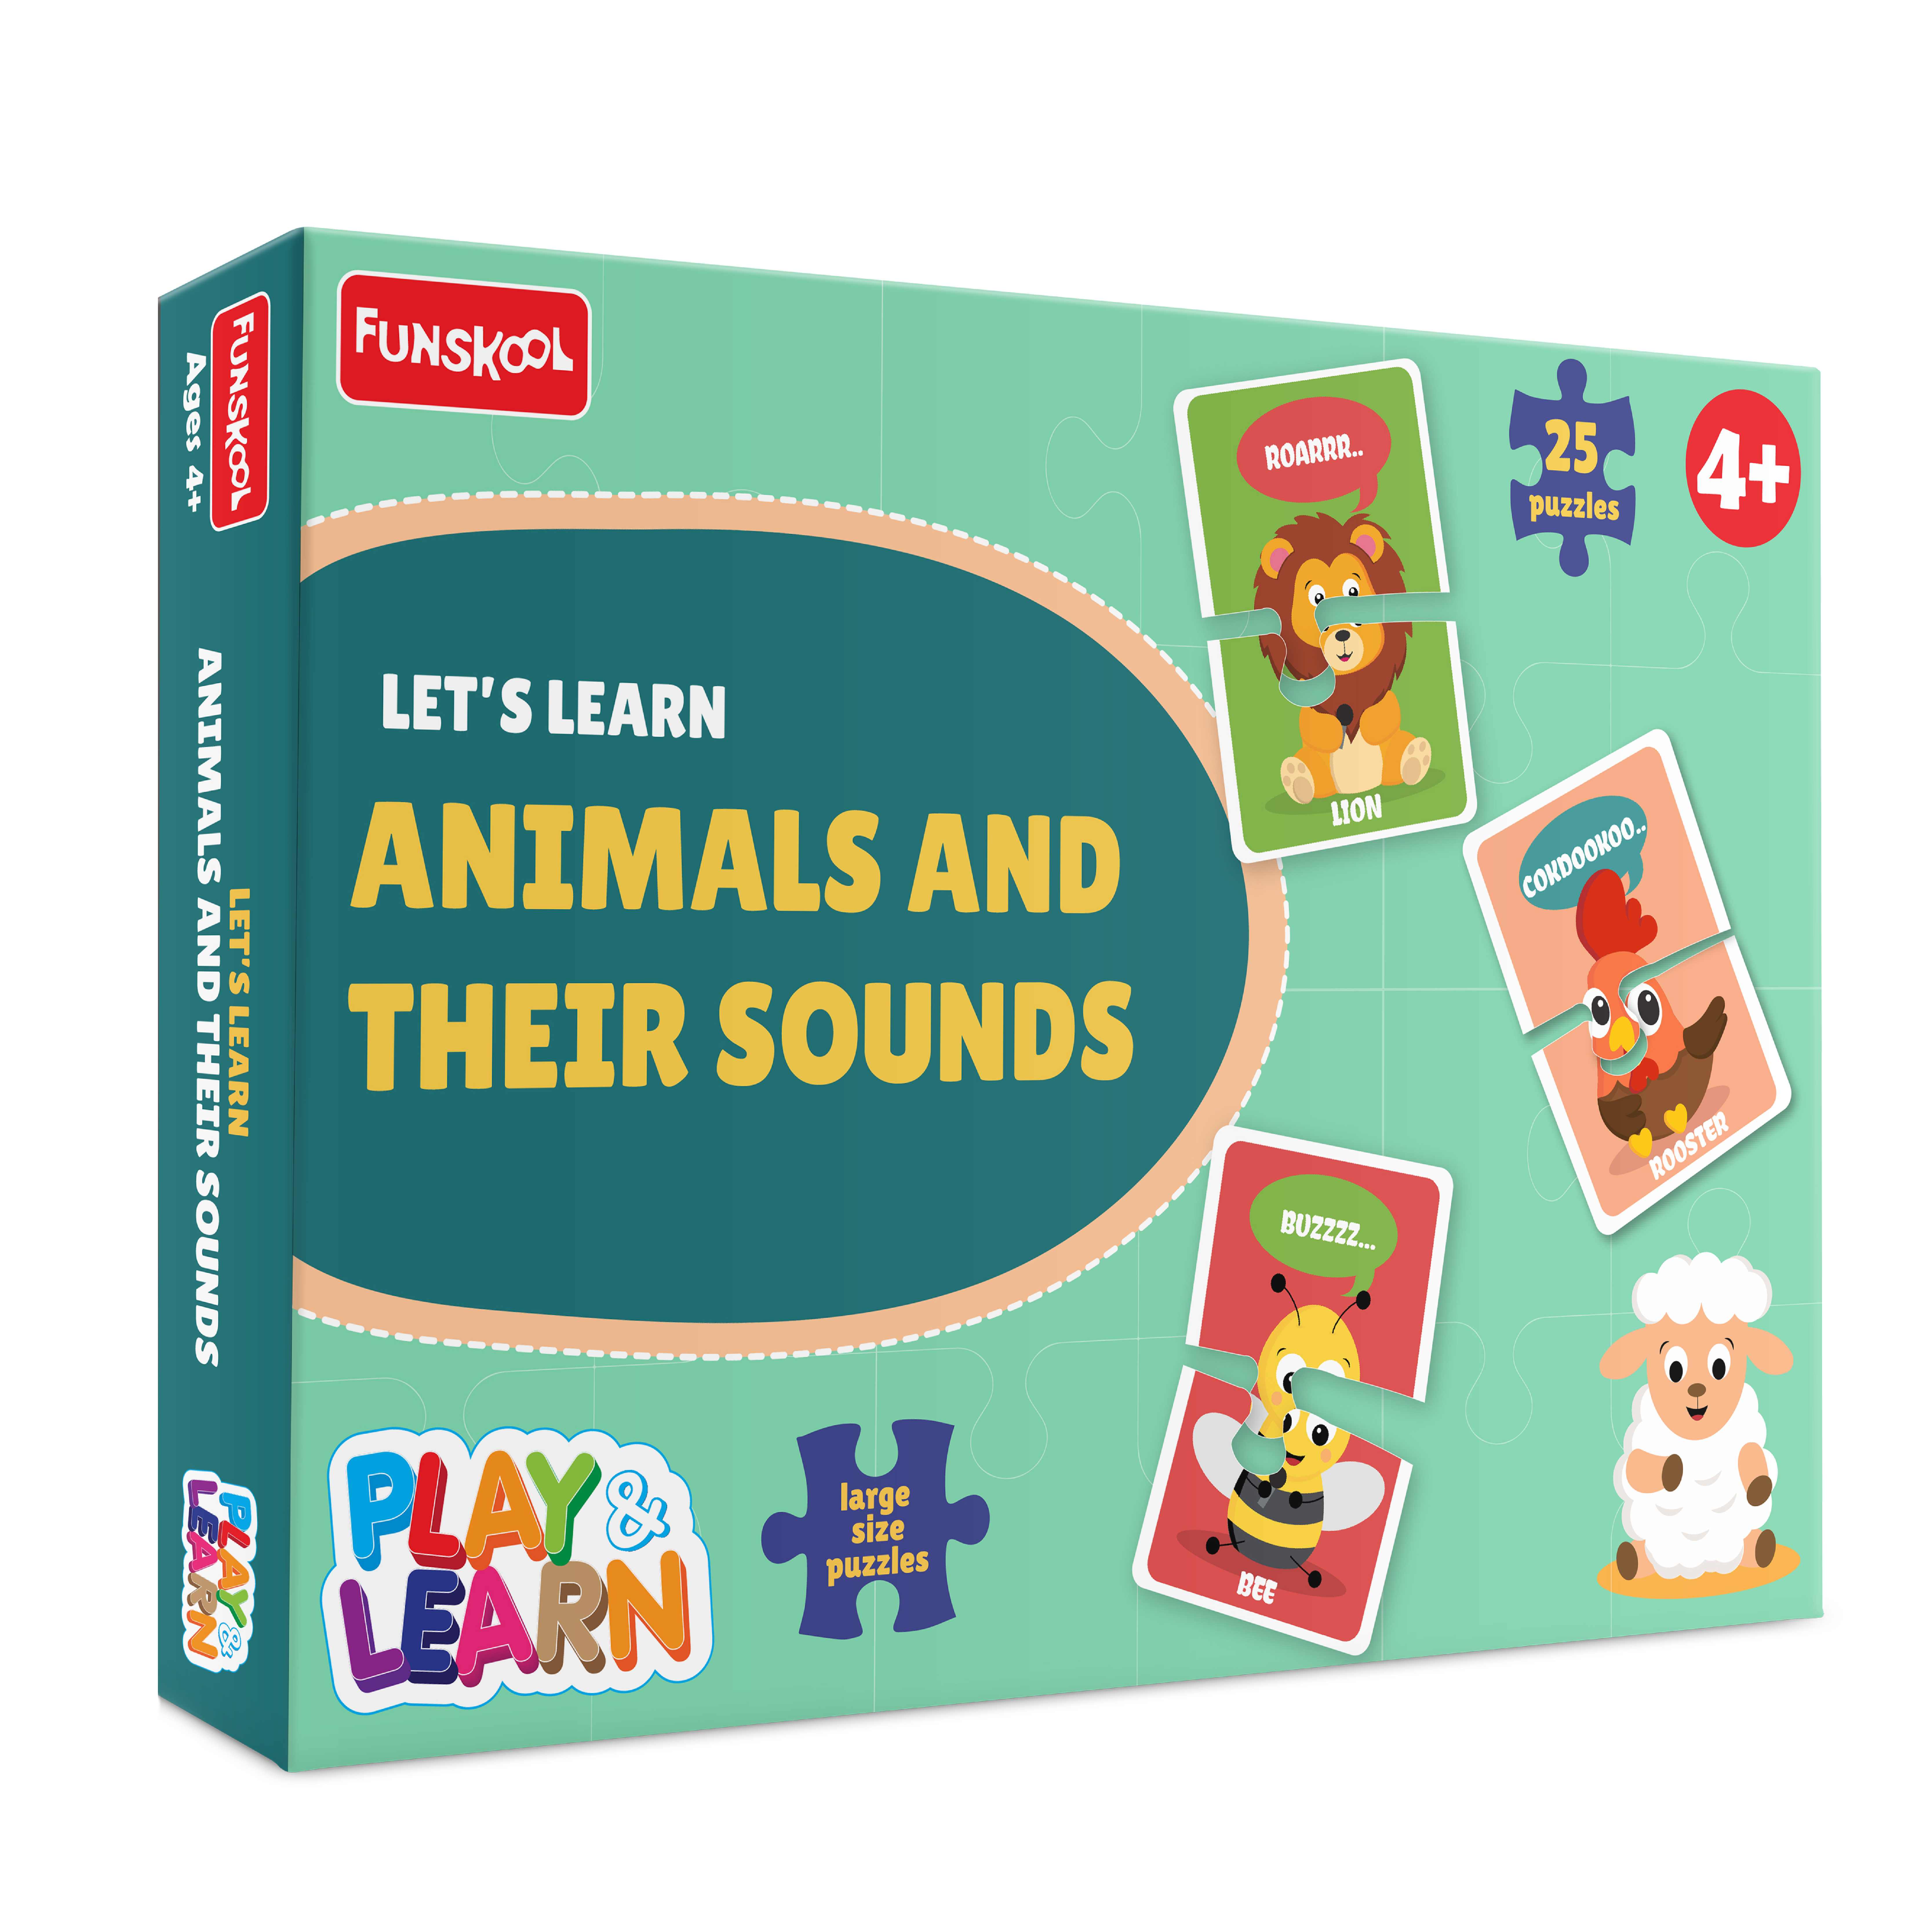 Funskool Play & Learn - Let's Learn Animals & Their Sounds